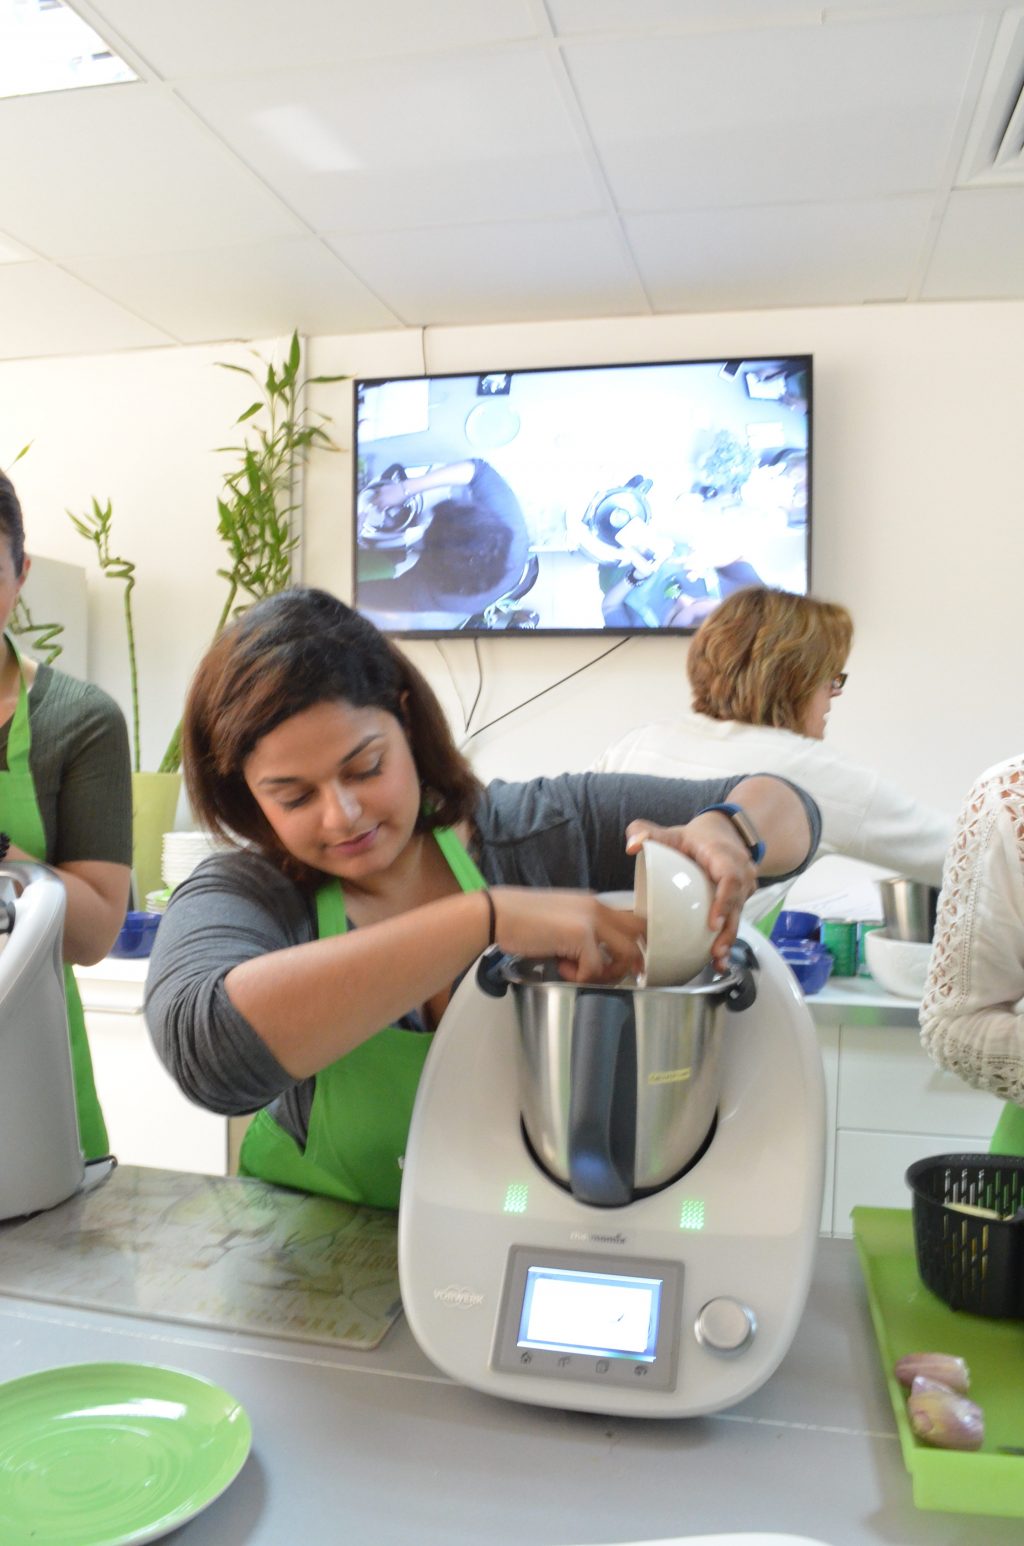 Me working on the monster that is the Thermomix!